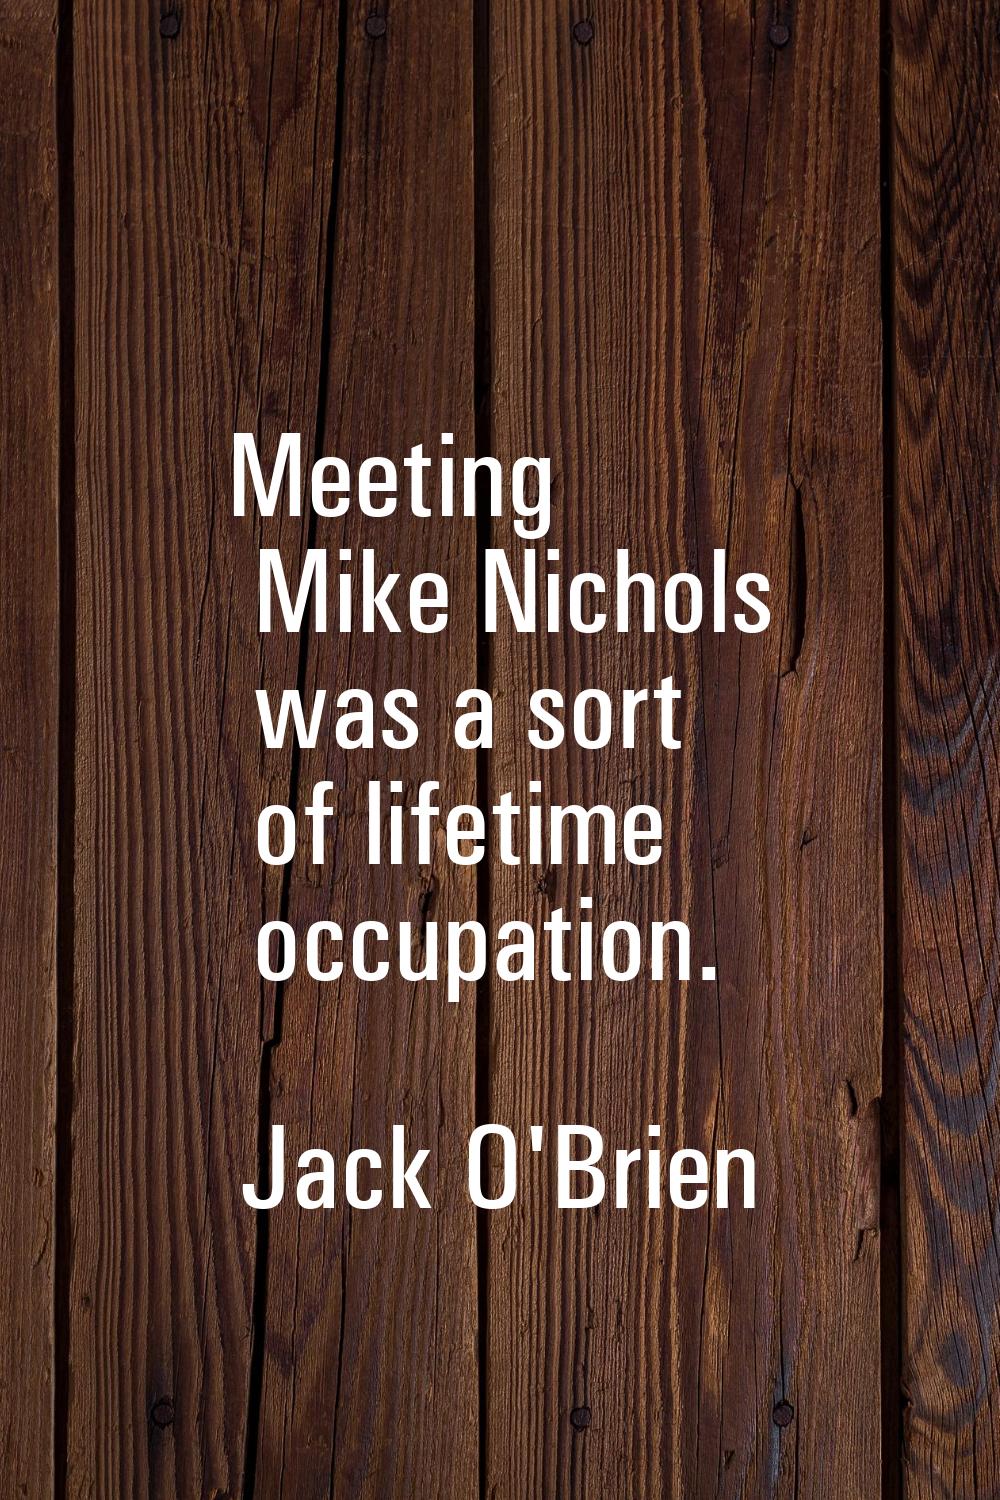 Meeting Mike Nichols was a sort of lifetime occupation.